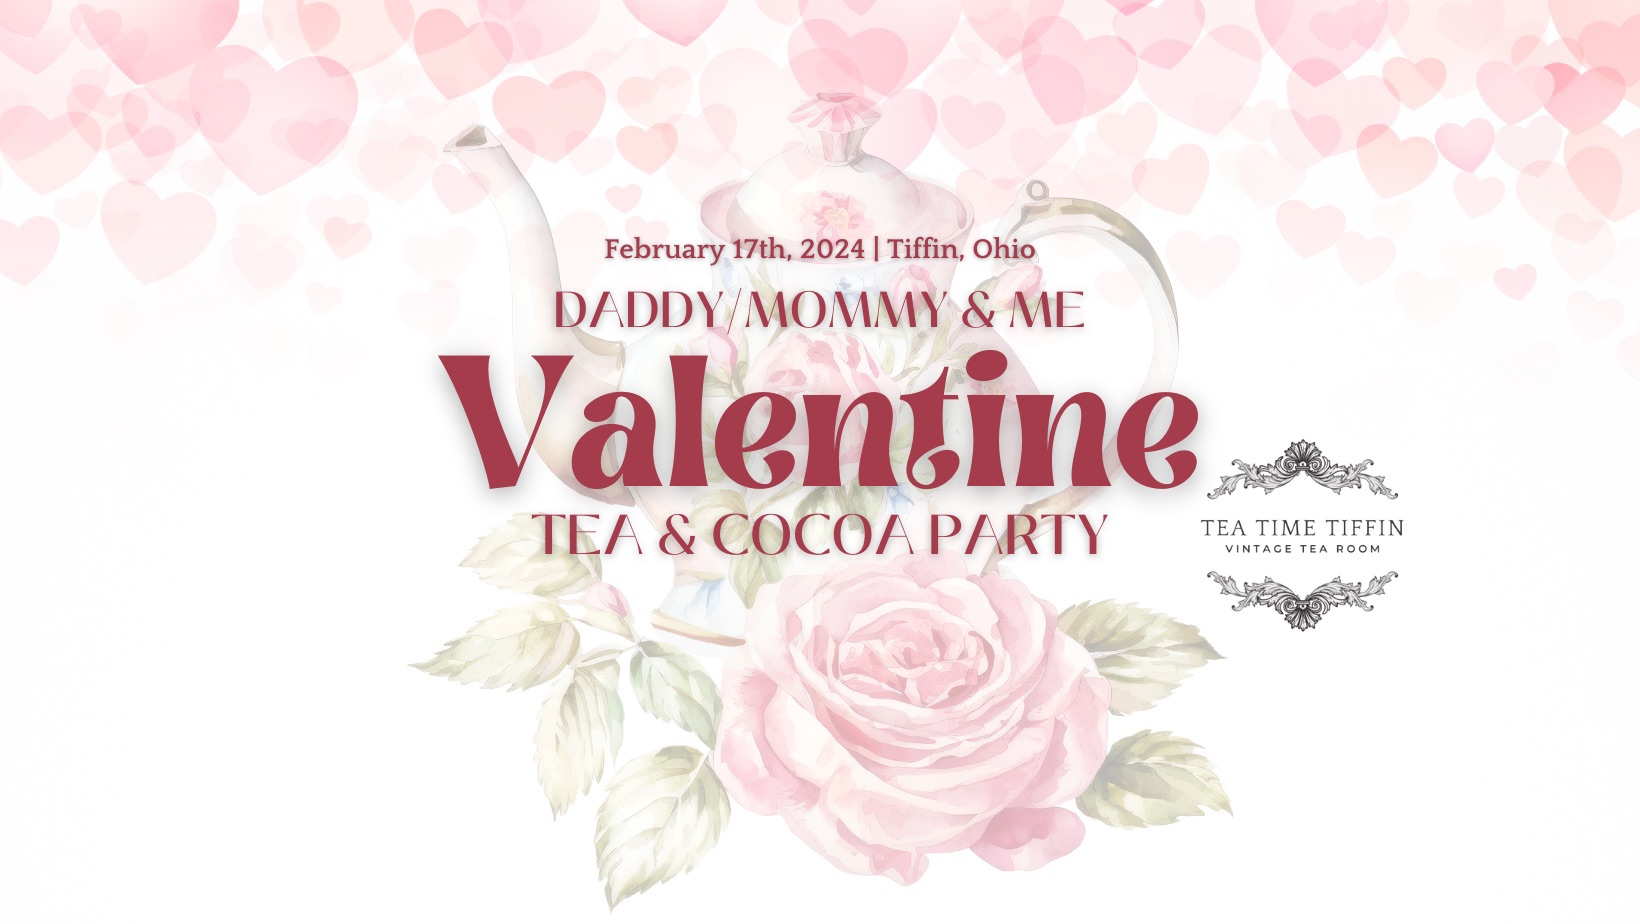 Daddy/Mommy & Me Valentine Tea & Cocoa Party